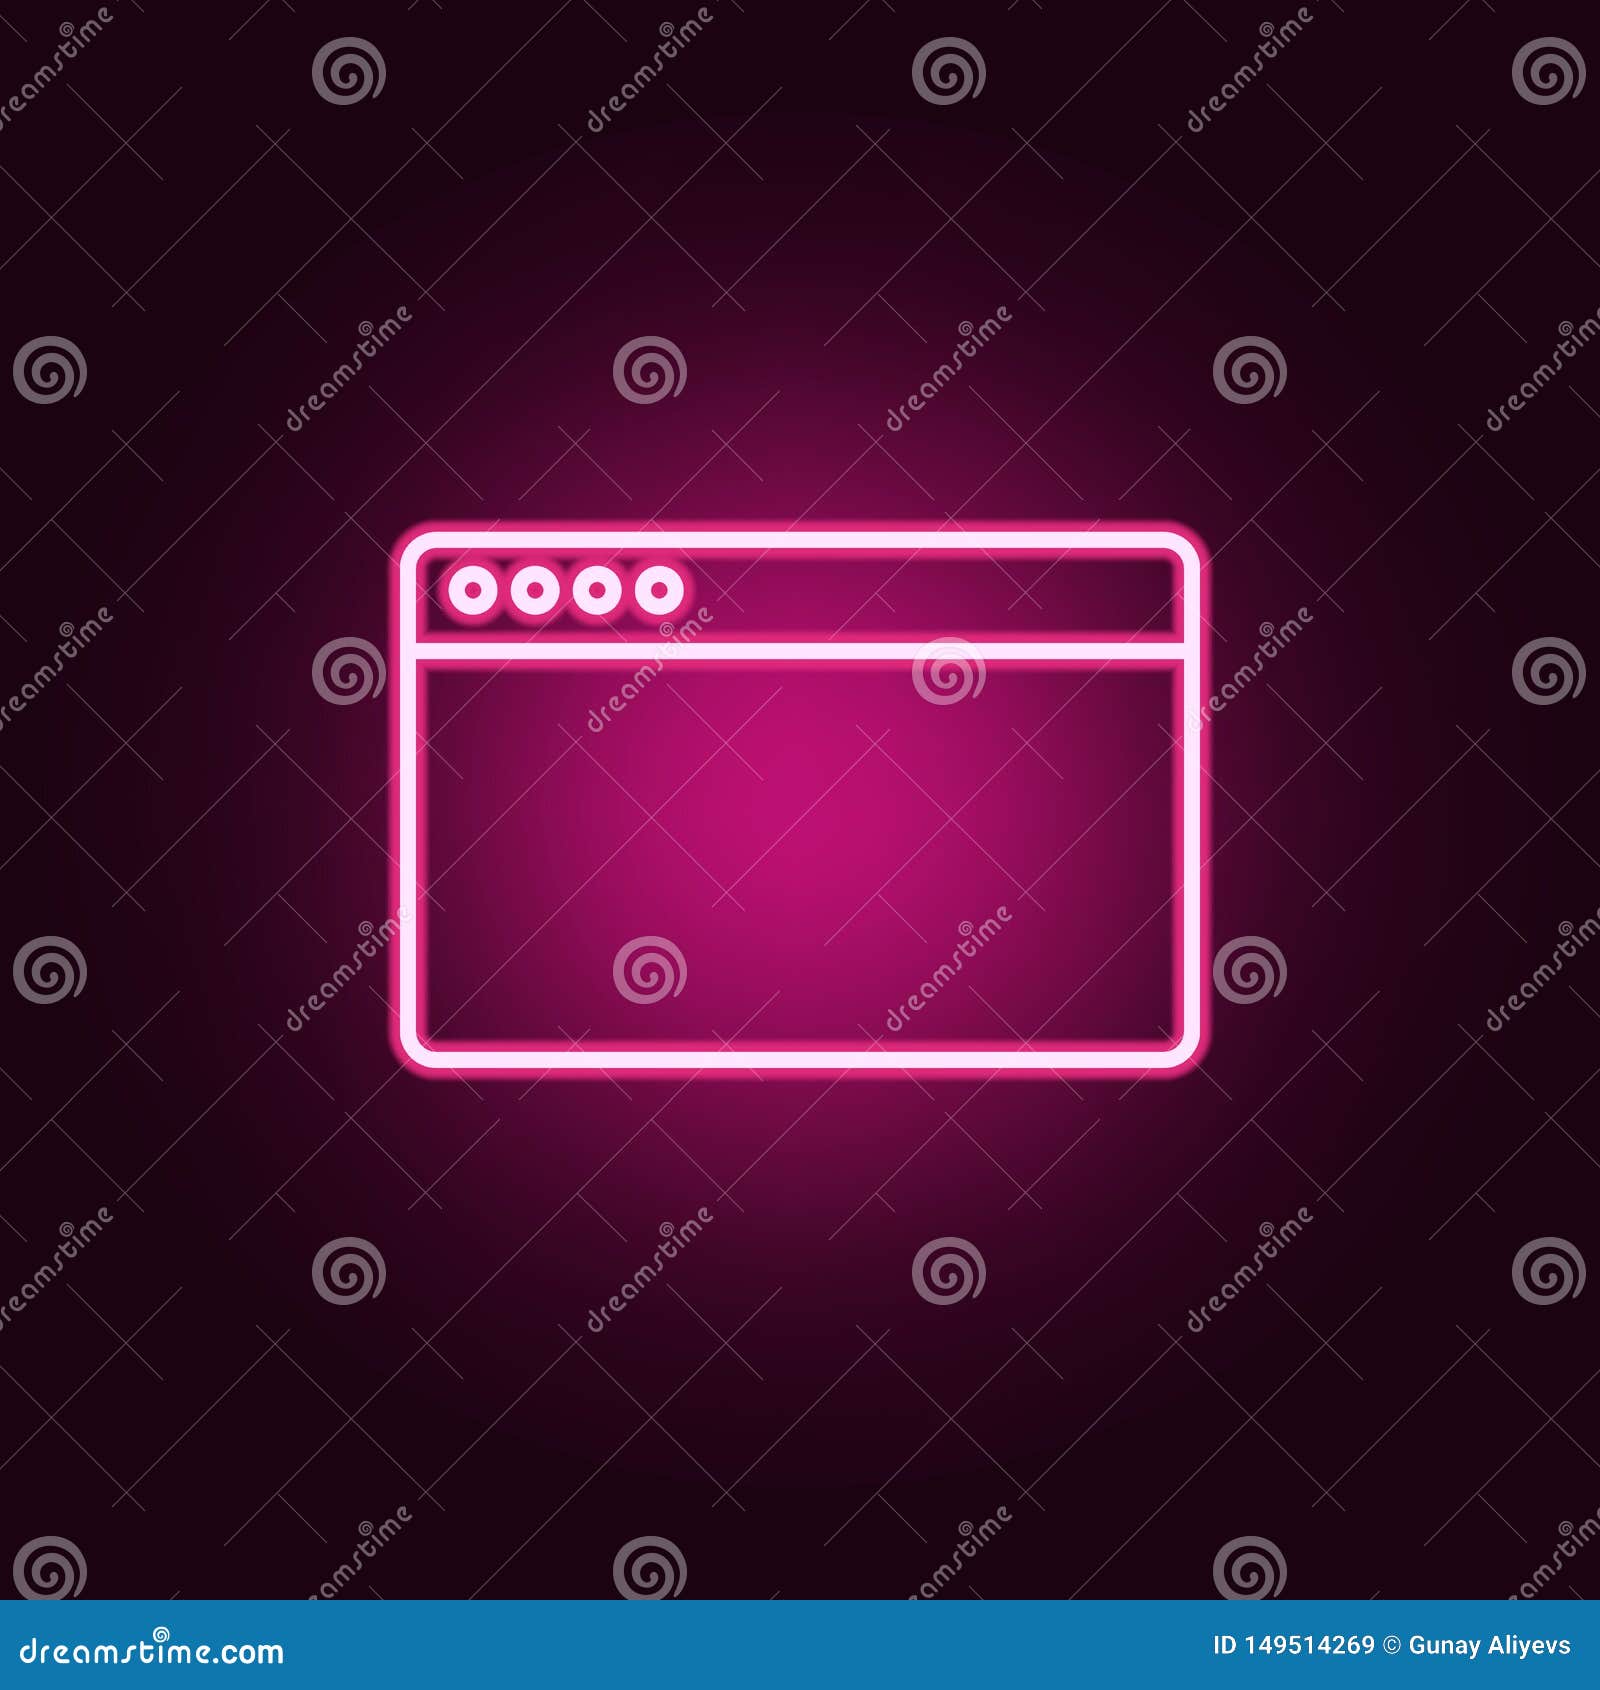 Browser Neon Icon Elements Of Web Set Stock Illustration